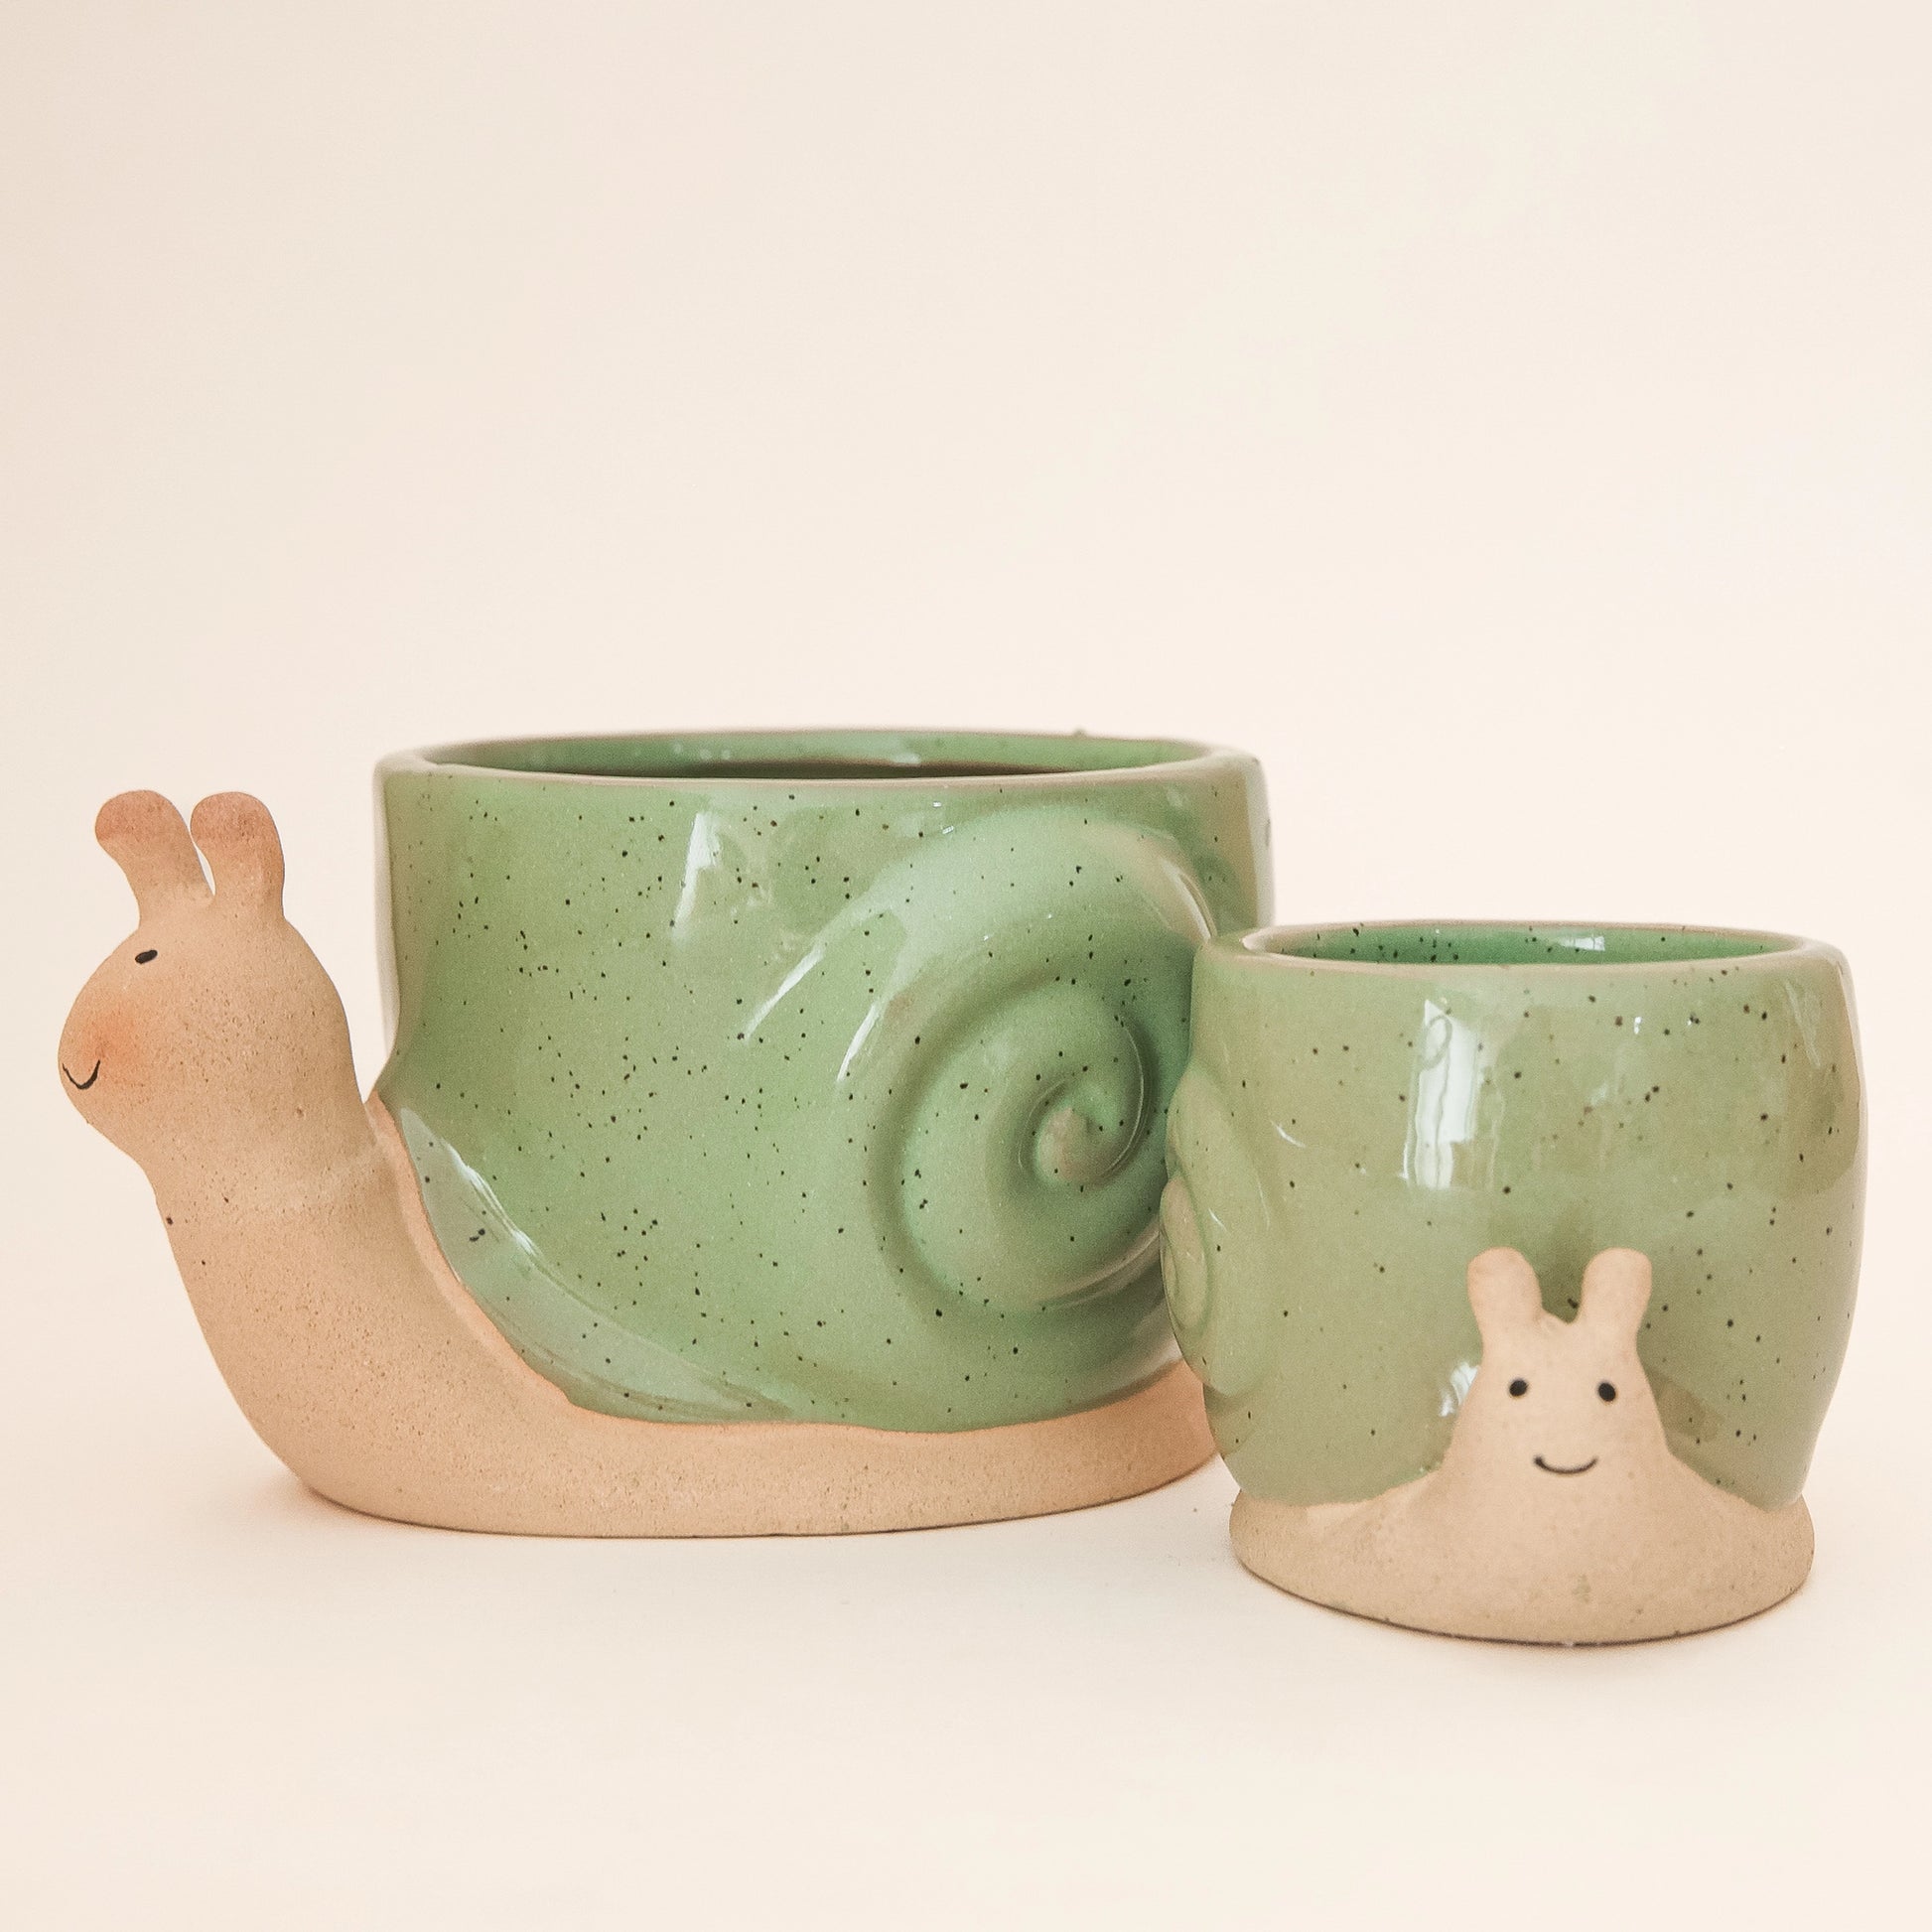 On a tan background is two ceramic planters in the shape of a snail with smiling faces and a swirly green "shell".